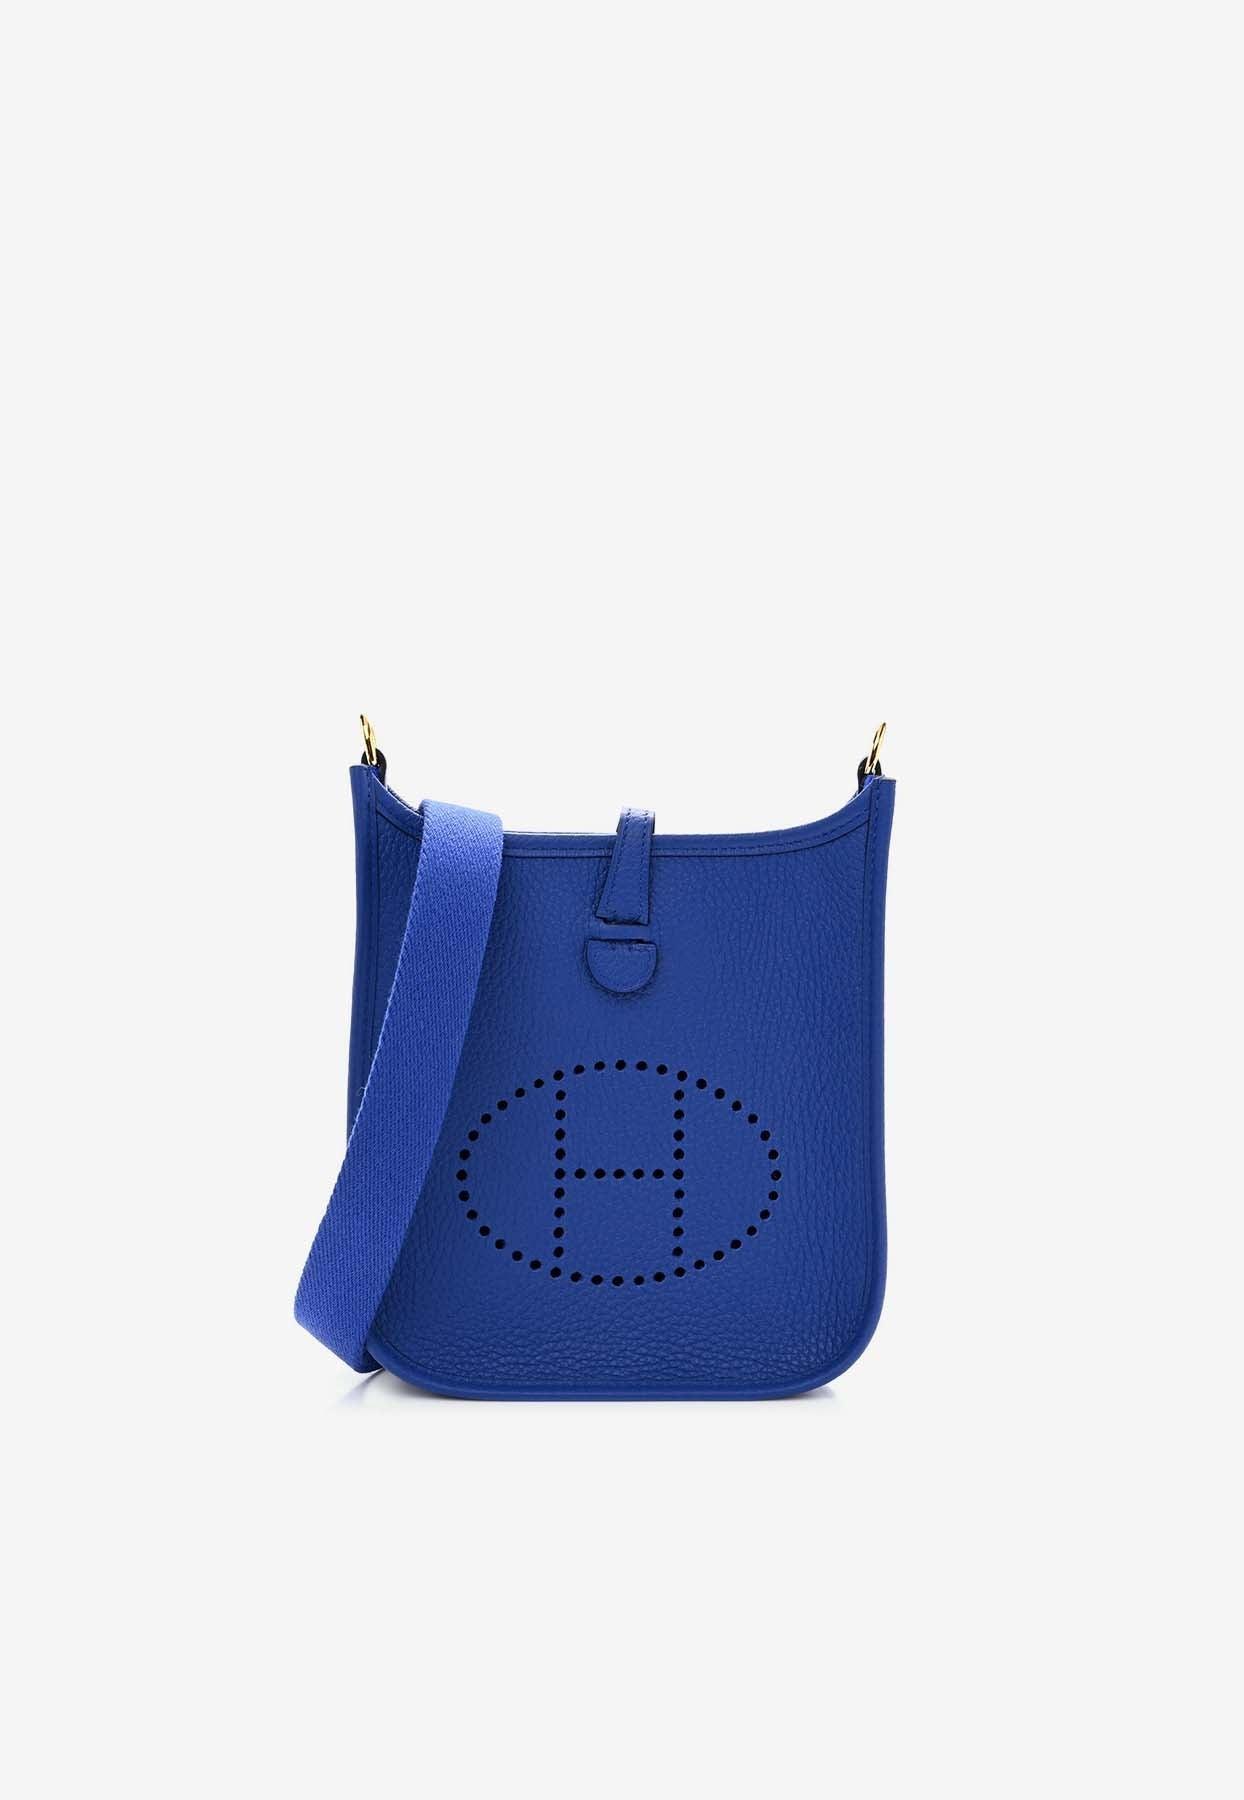 Hermès Evelyne Tpm In Bleu Royal Taurillon Clemence With Gold